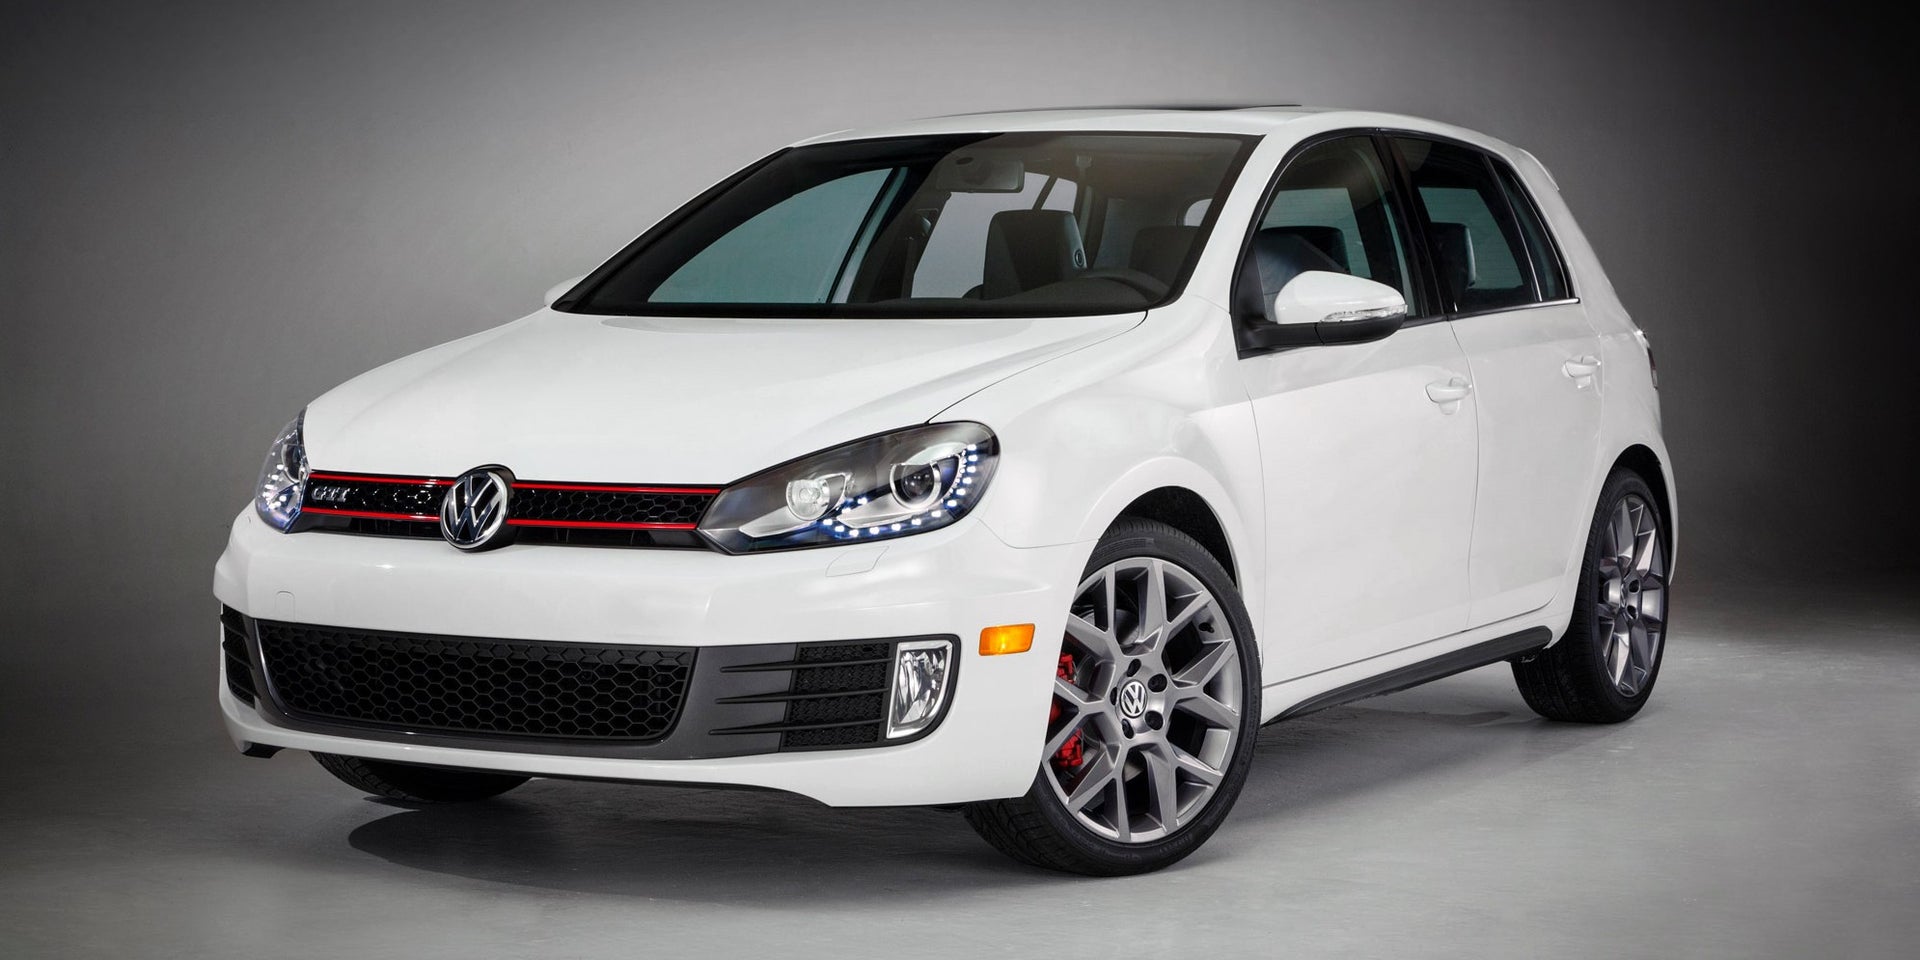 Limited Edition Golf 6 GTI Models Announced